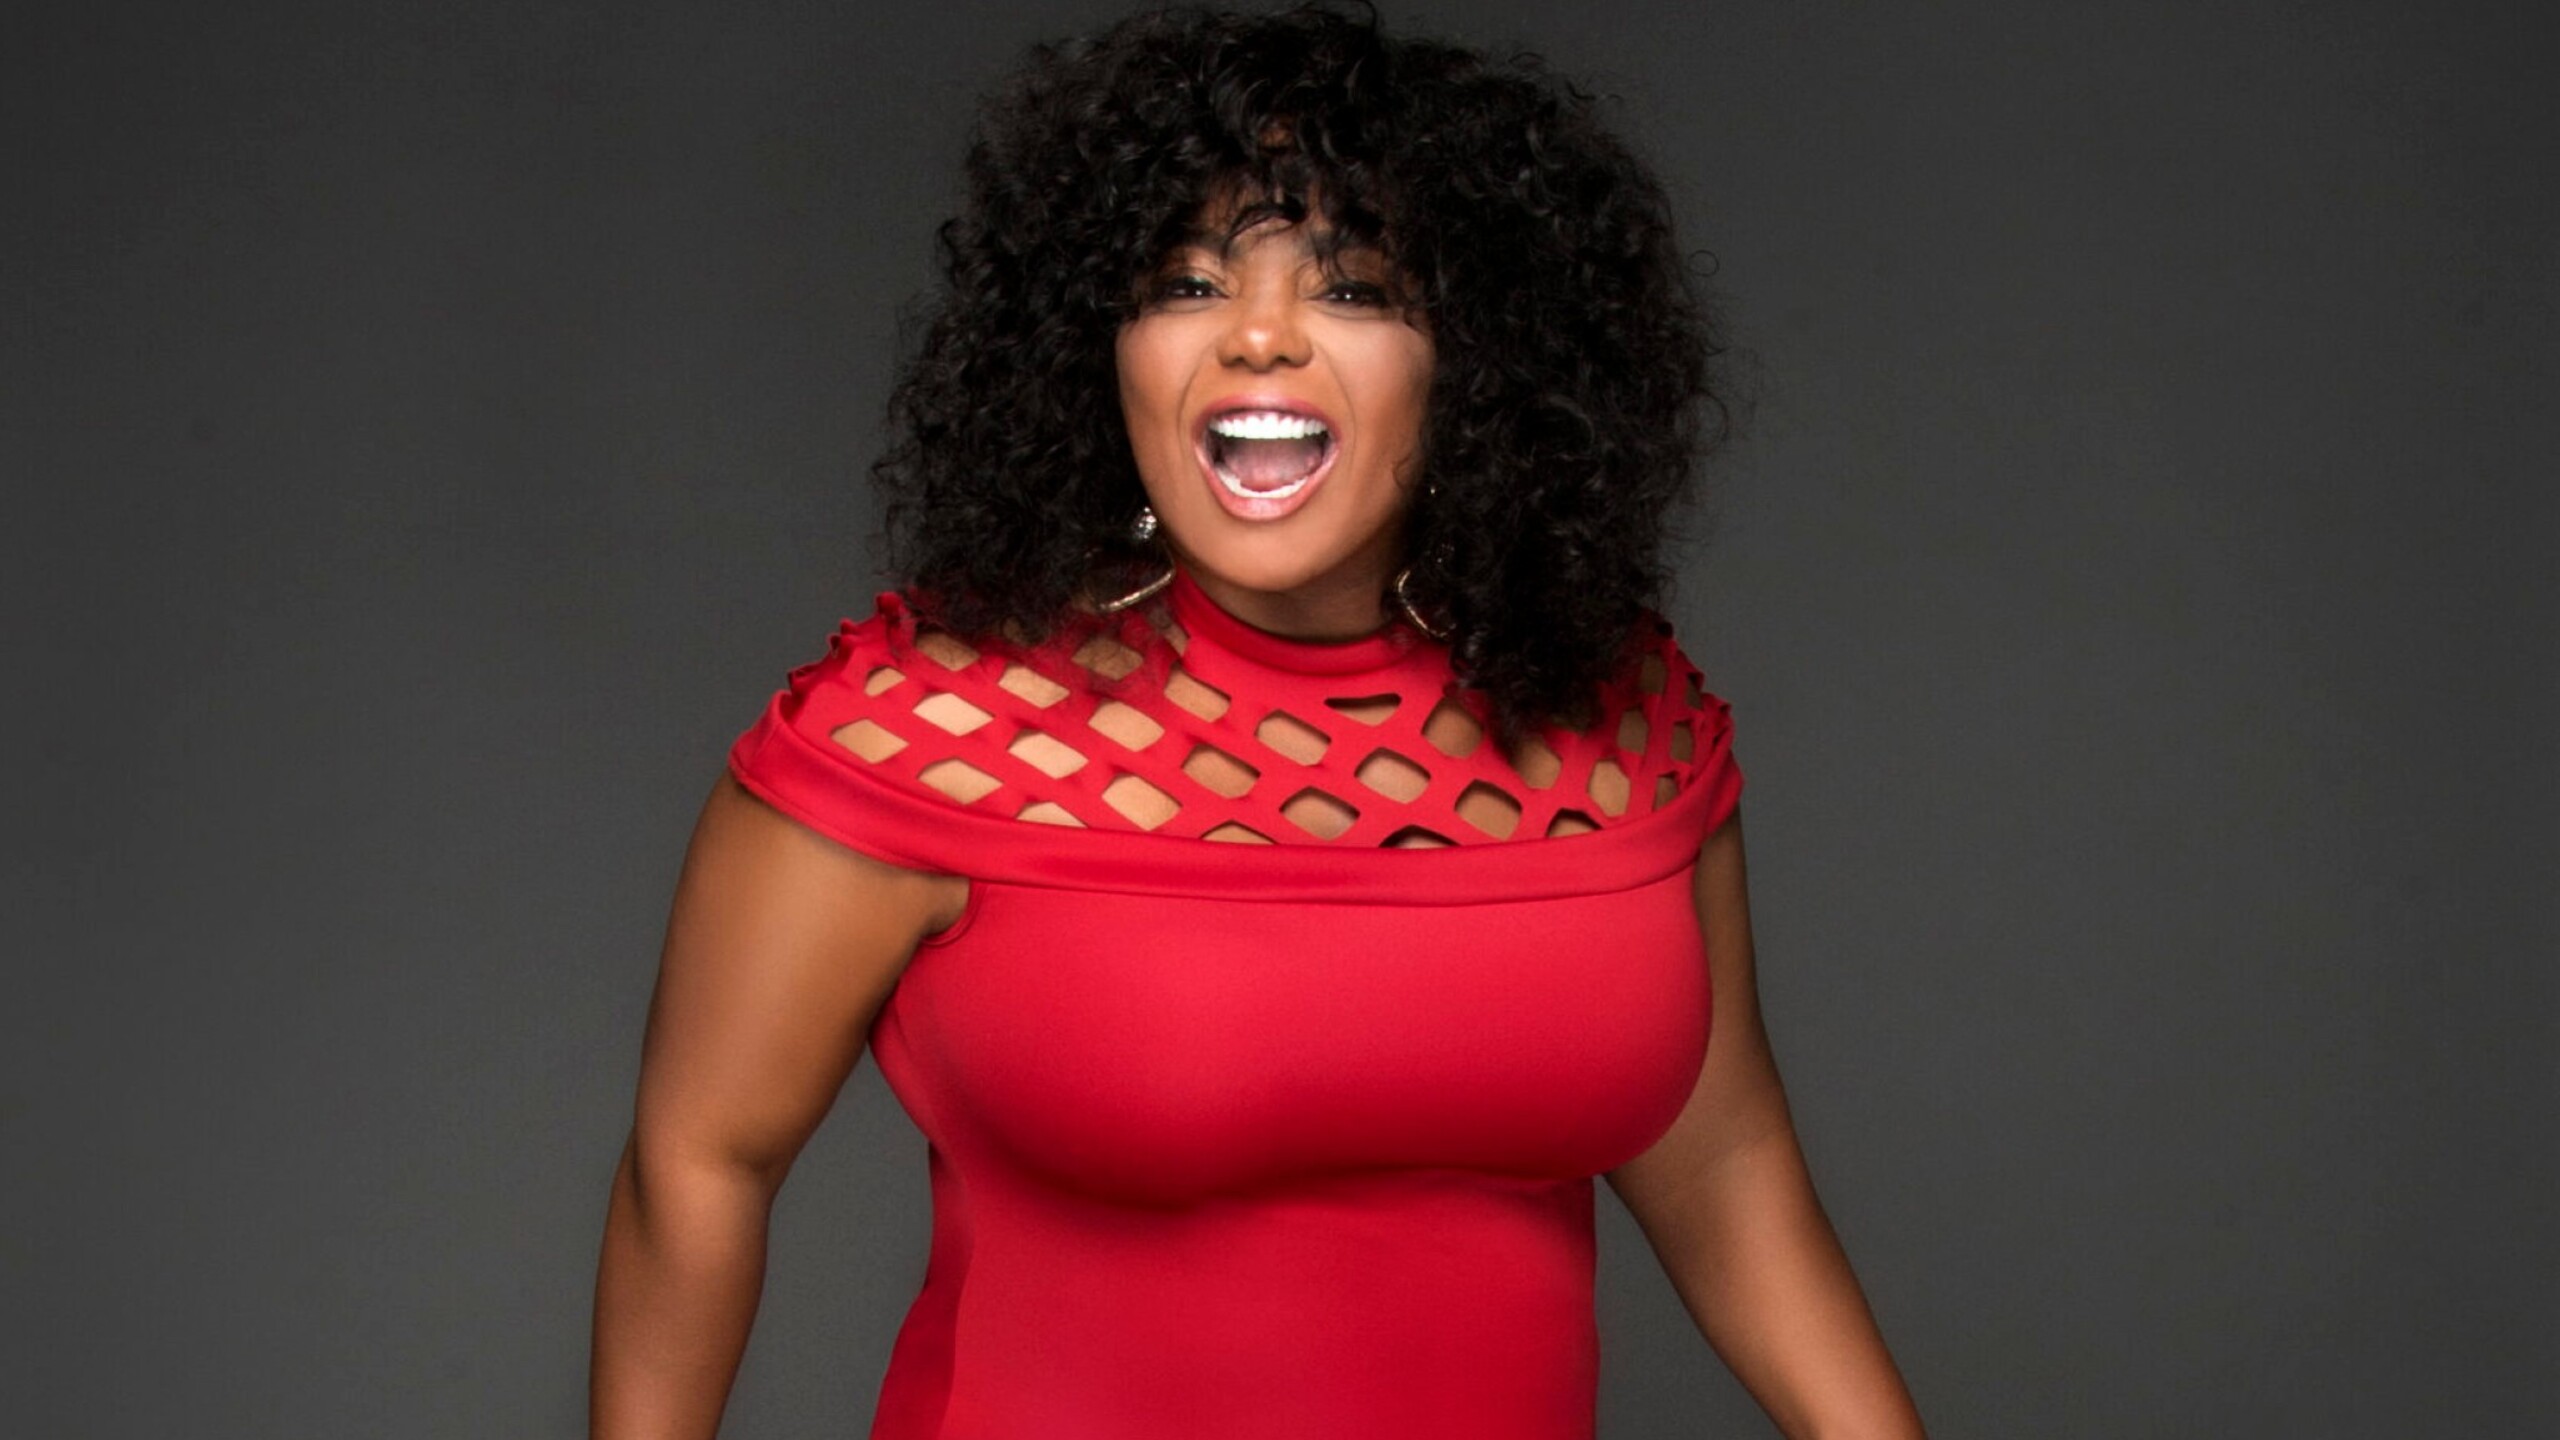 Actress & Comedian Cocoa Brown Dishes on Faith, Career, Latest Movies, and Failed Suicide Attempt